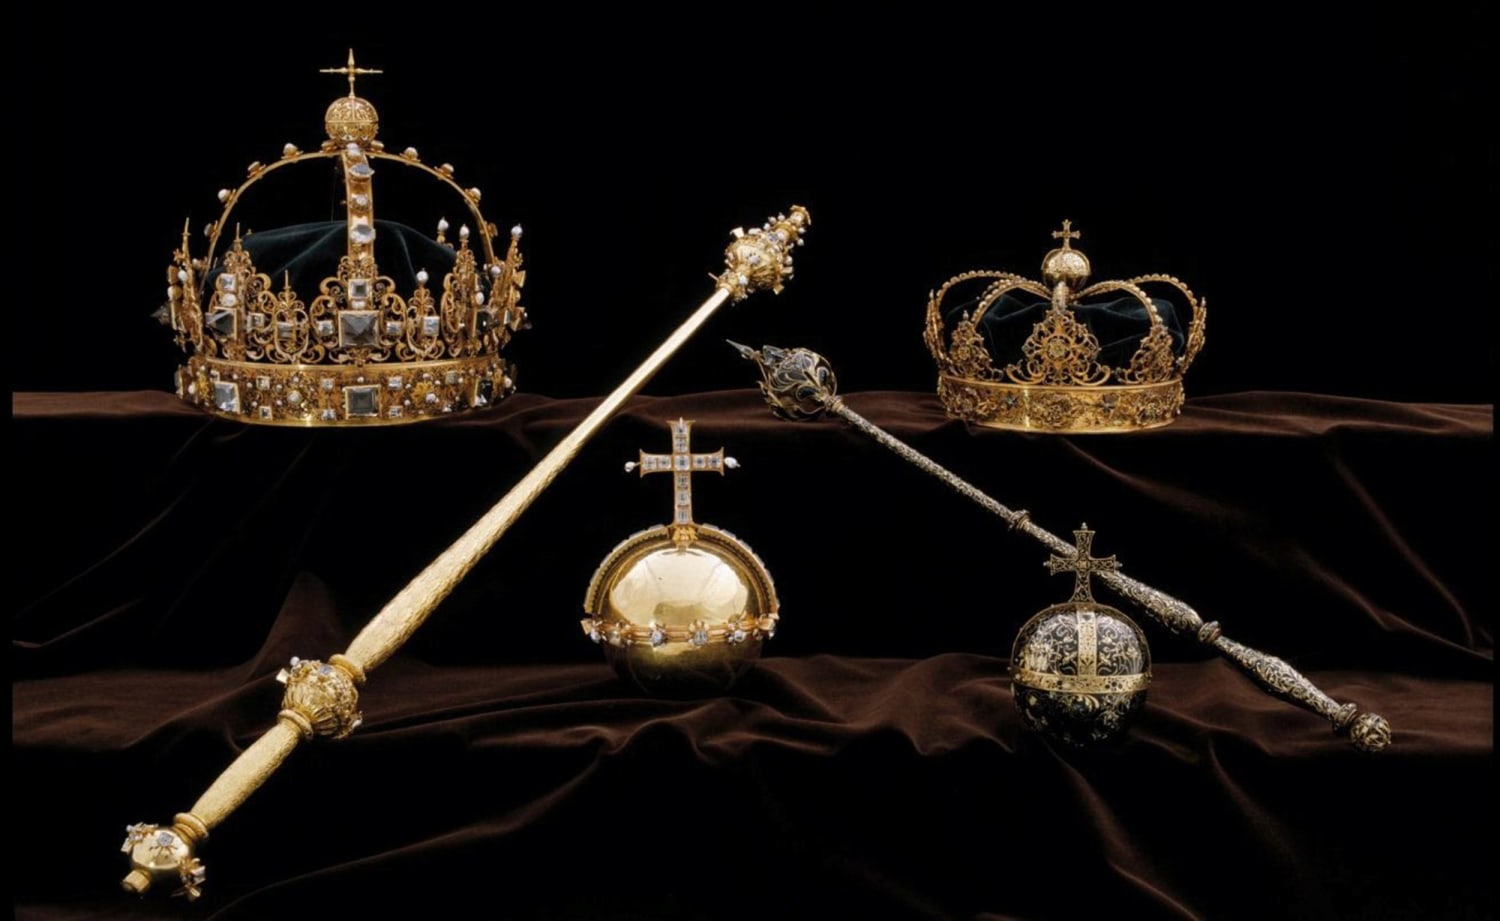 Sweden's stolen crown jewels have 'likely' found, police say